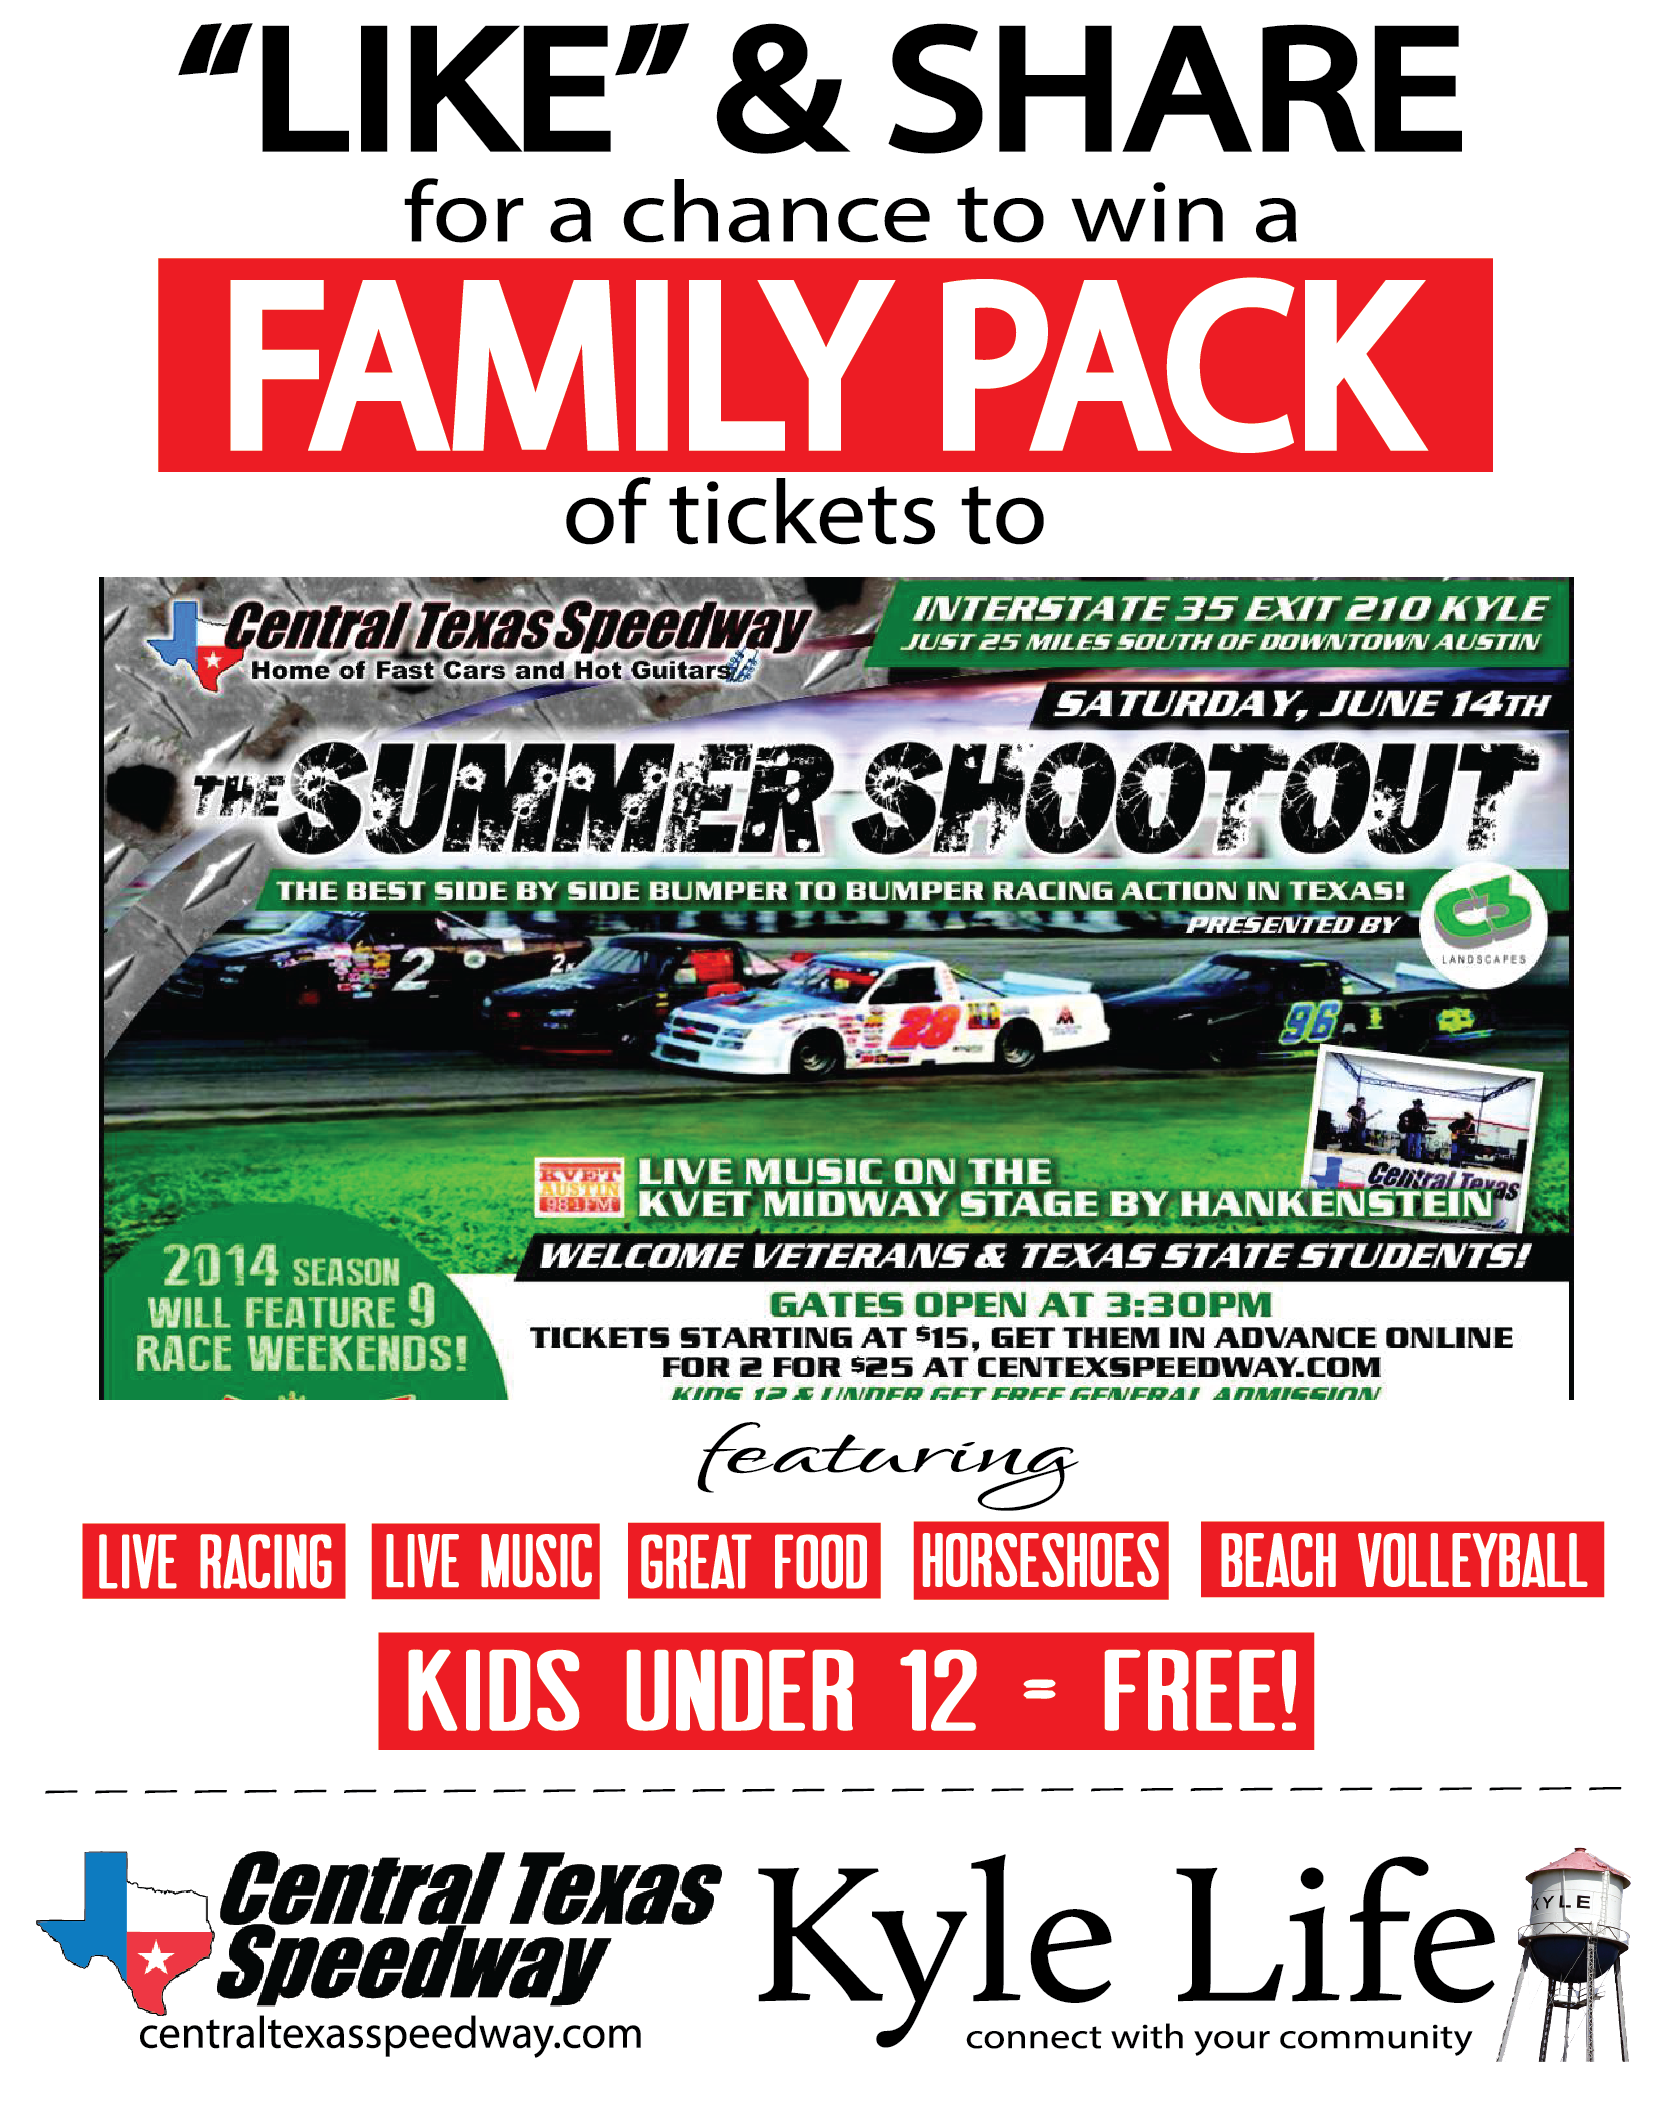 GIVEAWAY — Family Pack of Tickets to the Summer Shootout @ Central Texas Speedway!